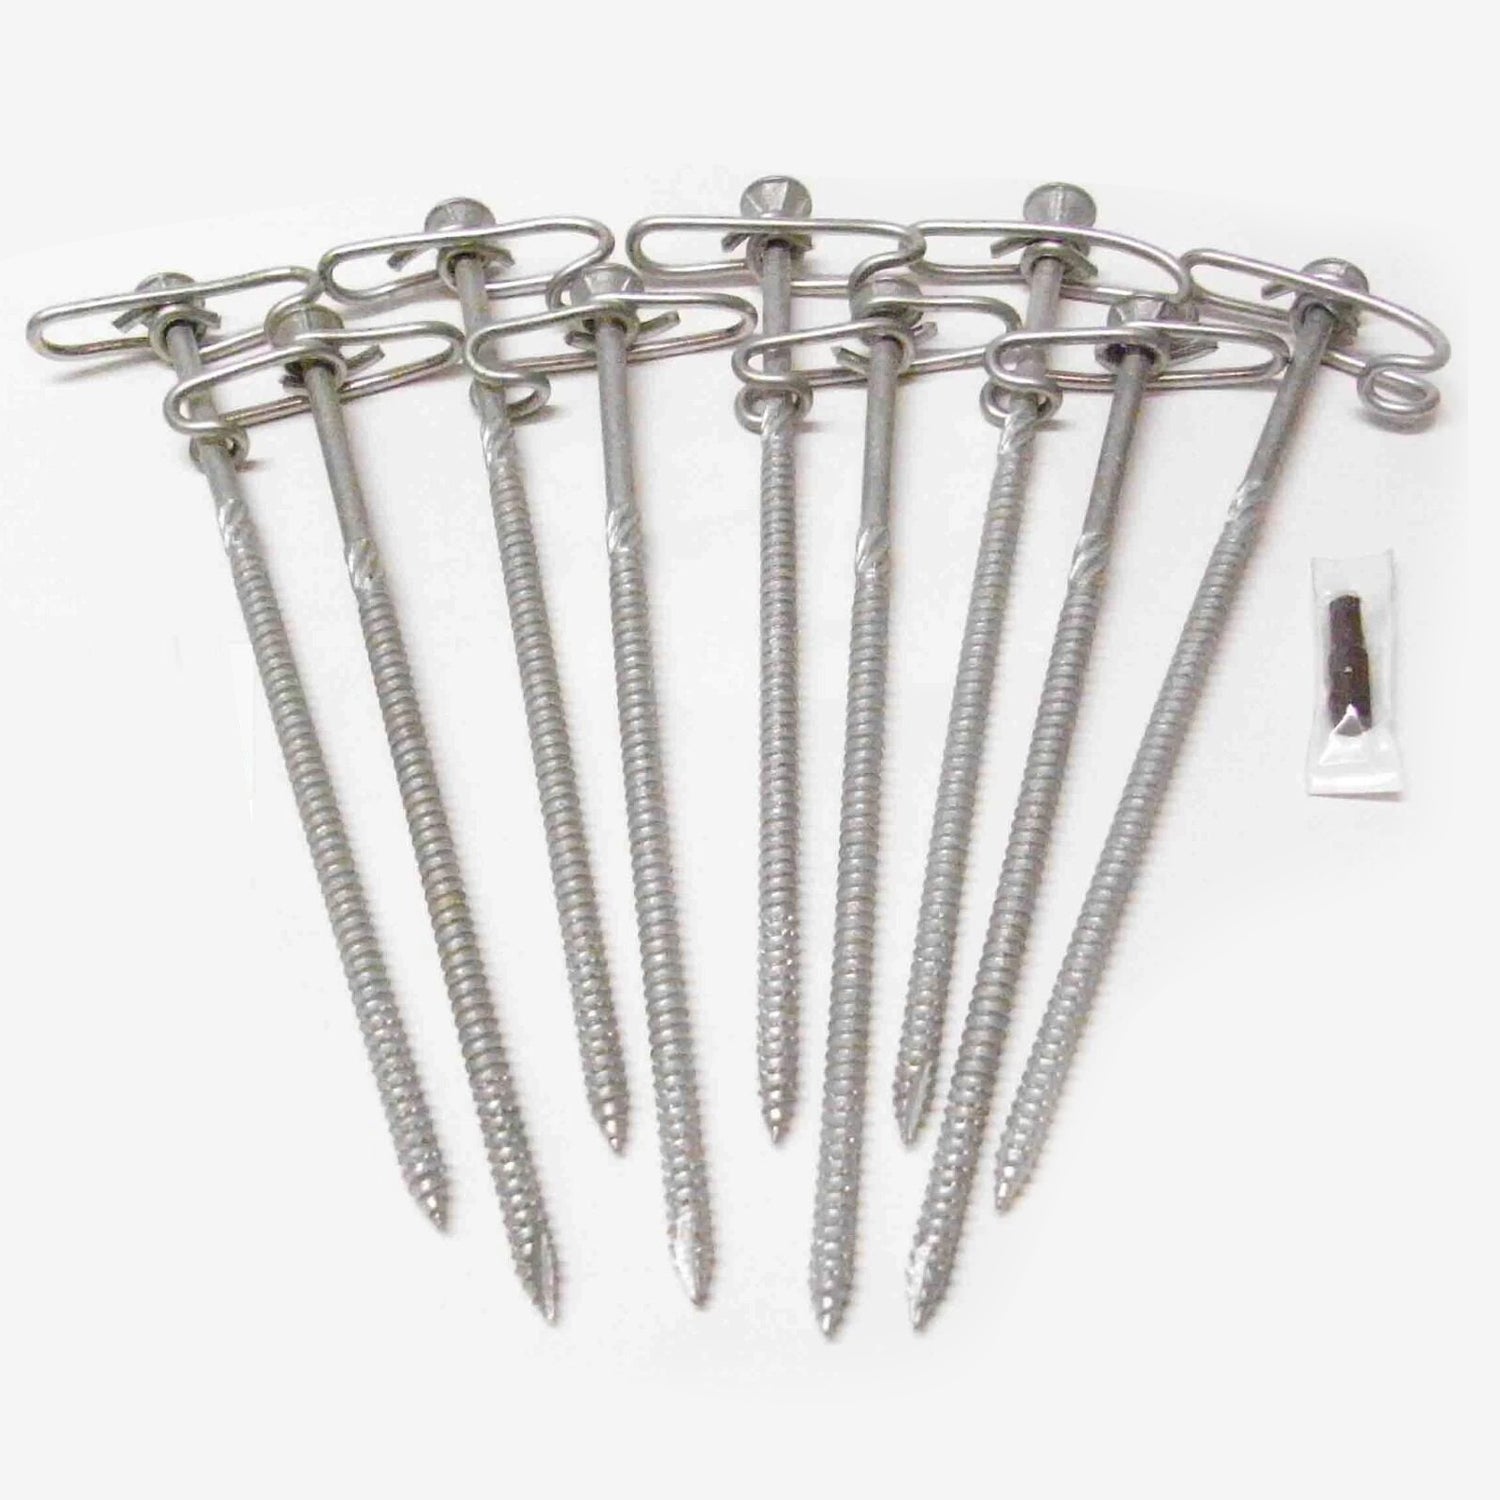 Outdoor Camping Steel Screw Tent Pegs and Guy Ropes - Set of 9 Pegs